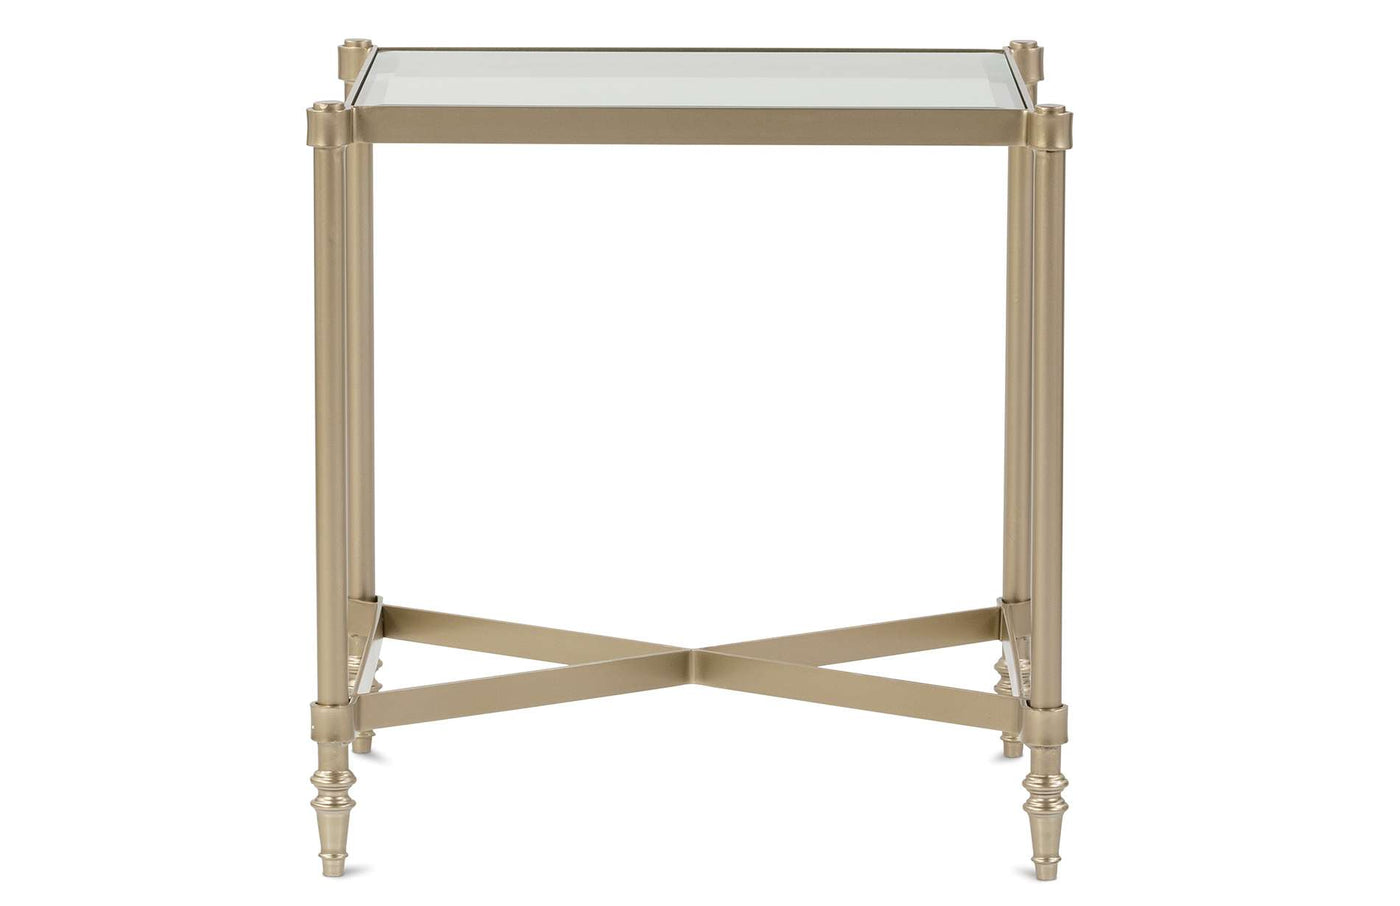 Allure End Table